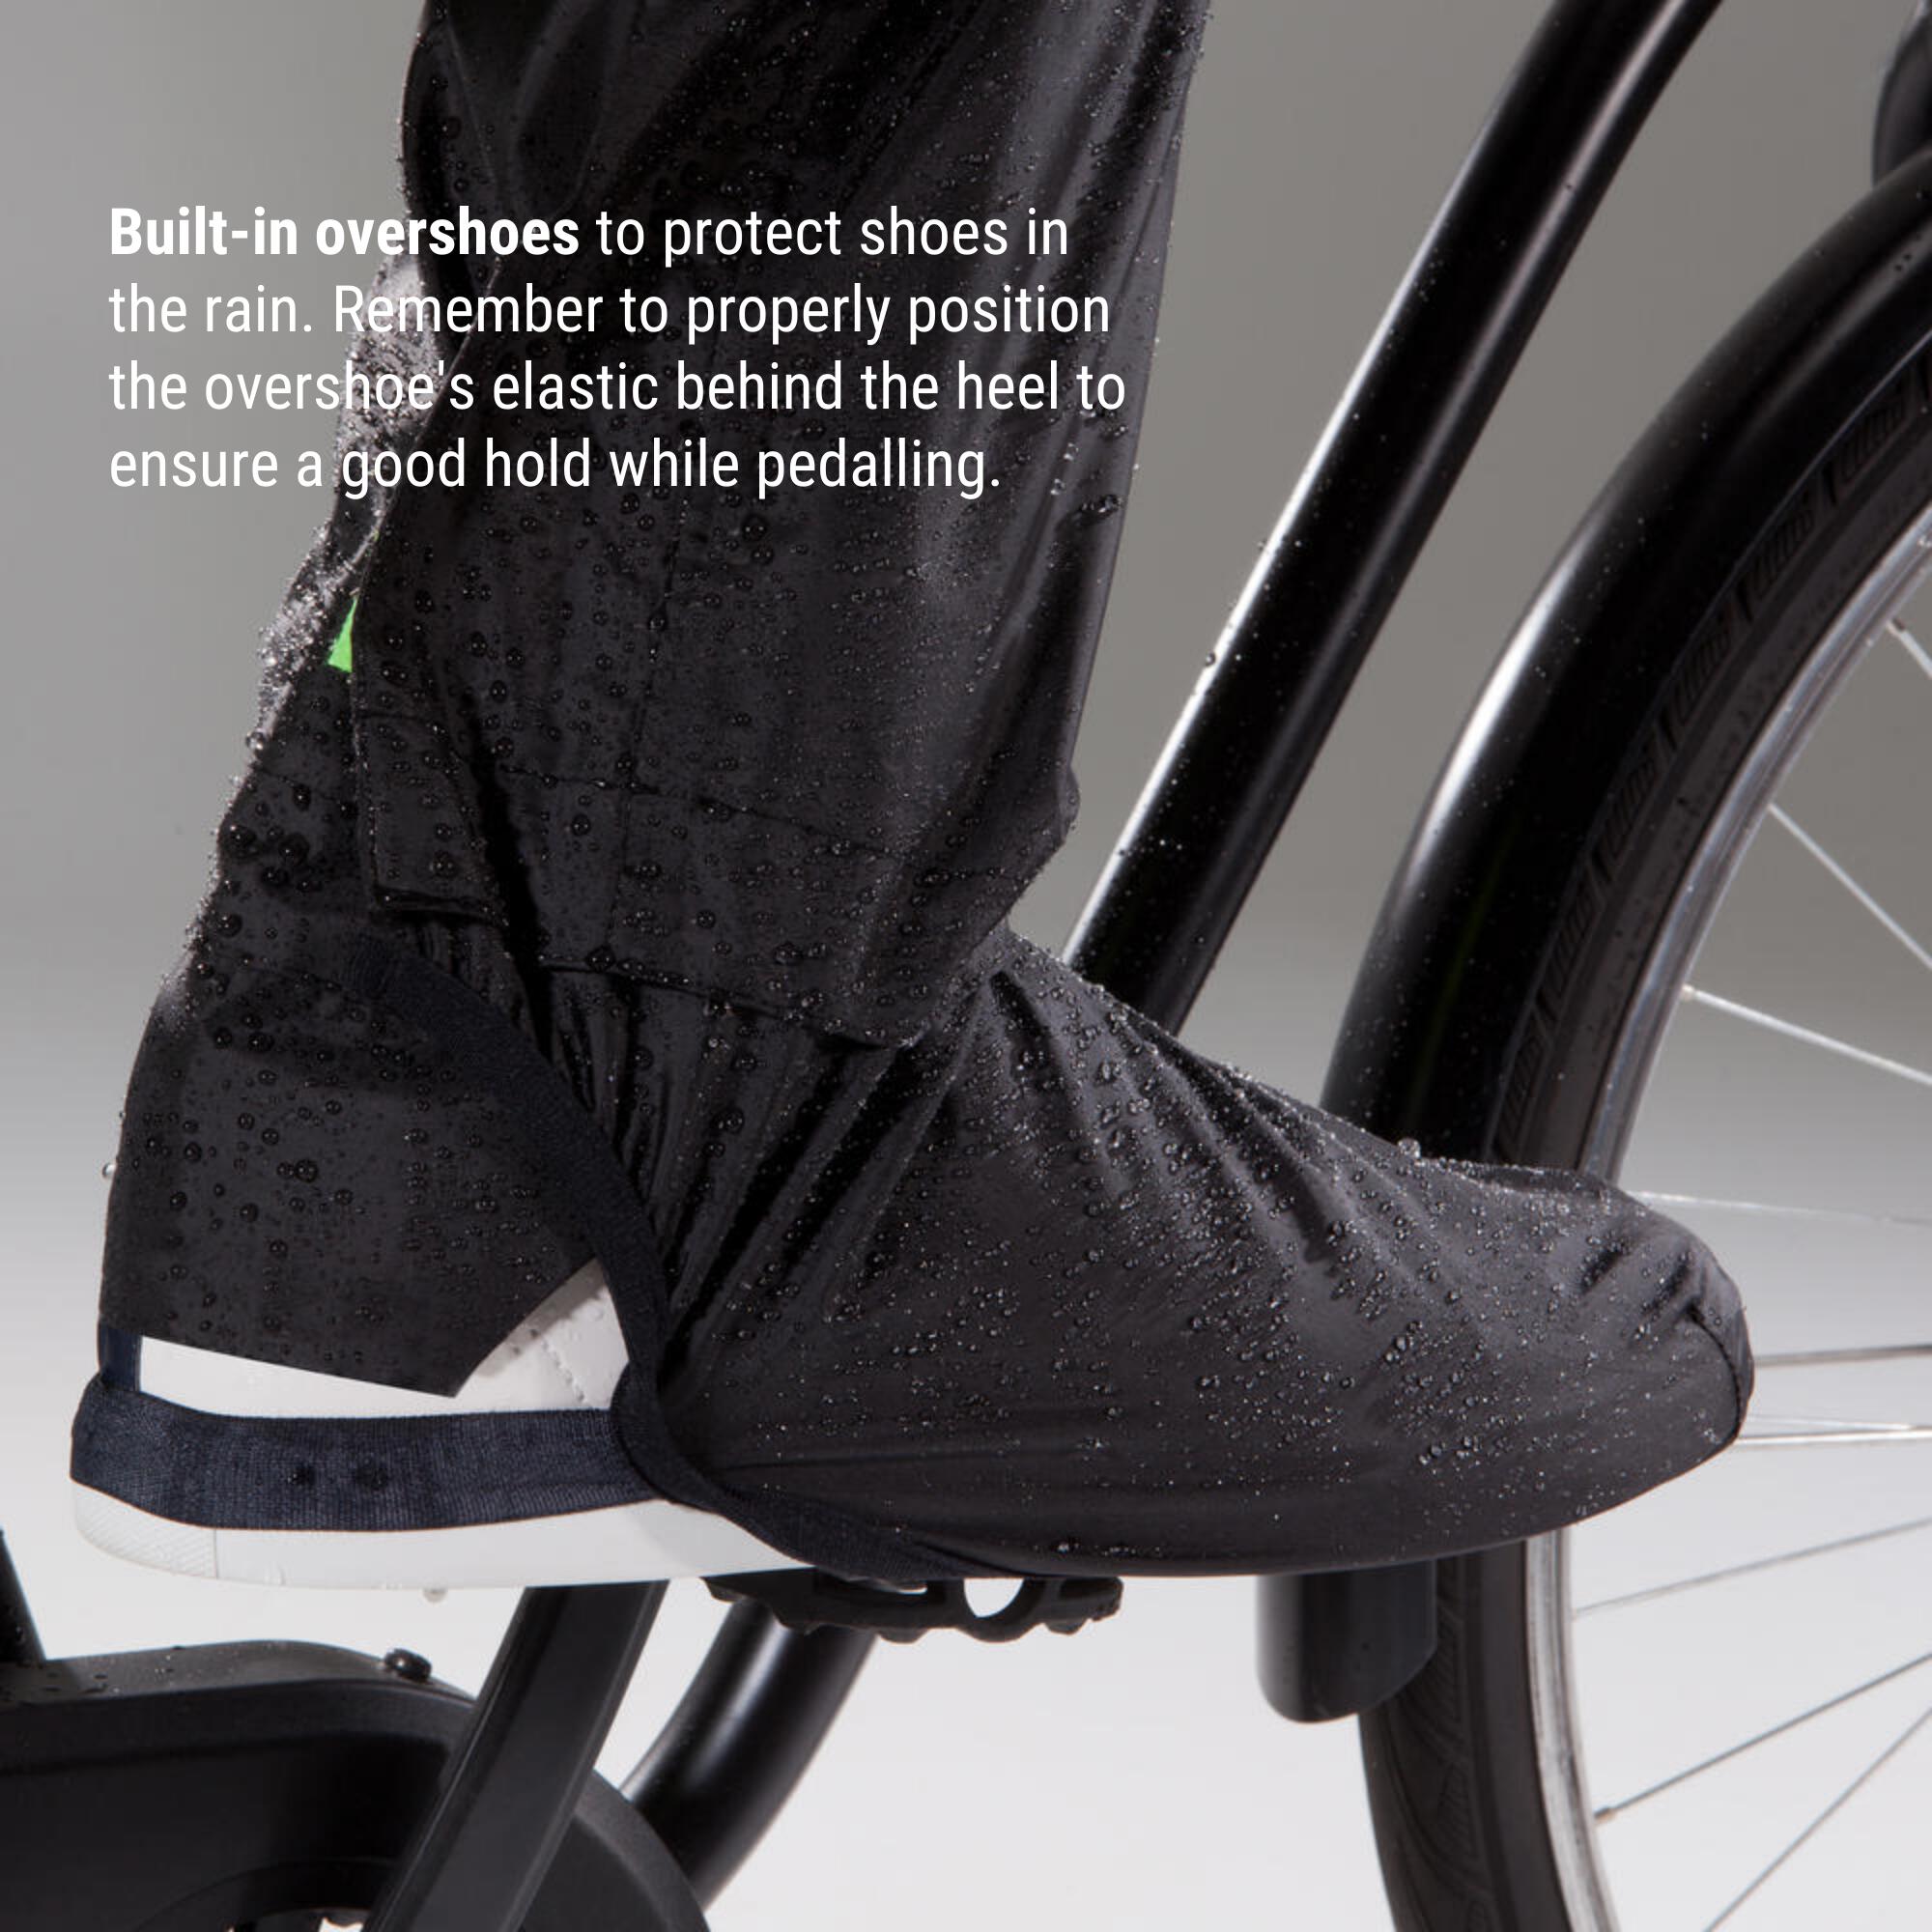 commuter - Prevent trouser damage when biking? - Bicycles Stack Exchange